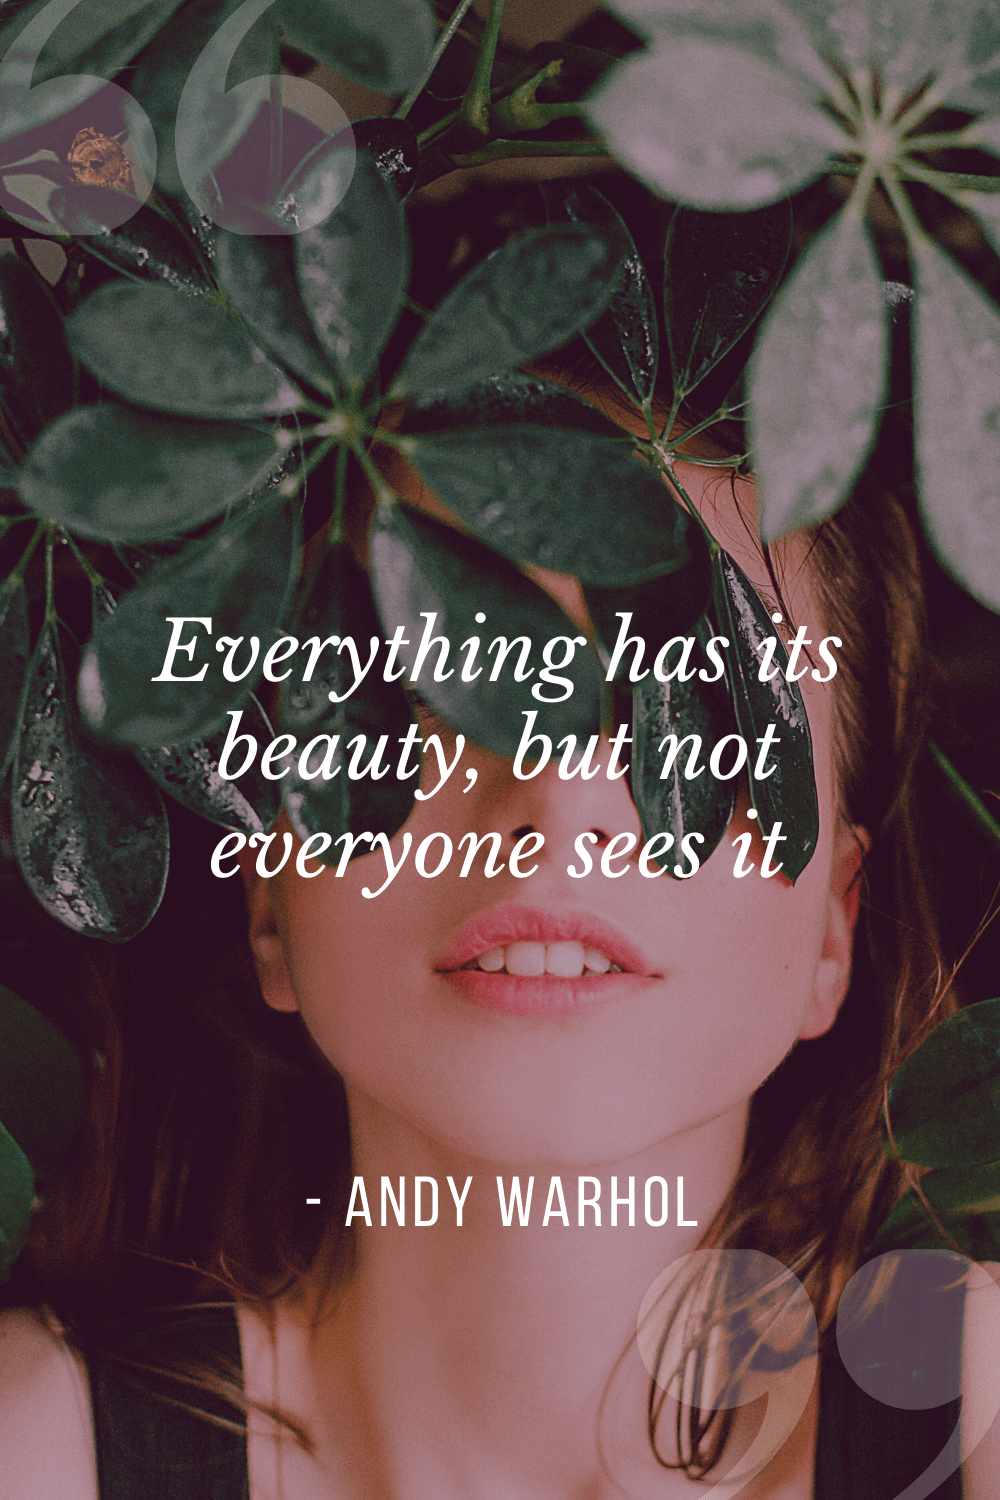 “Everything has its beauty, but not everyone sees it”, Andy Warhol